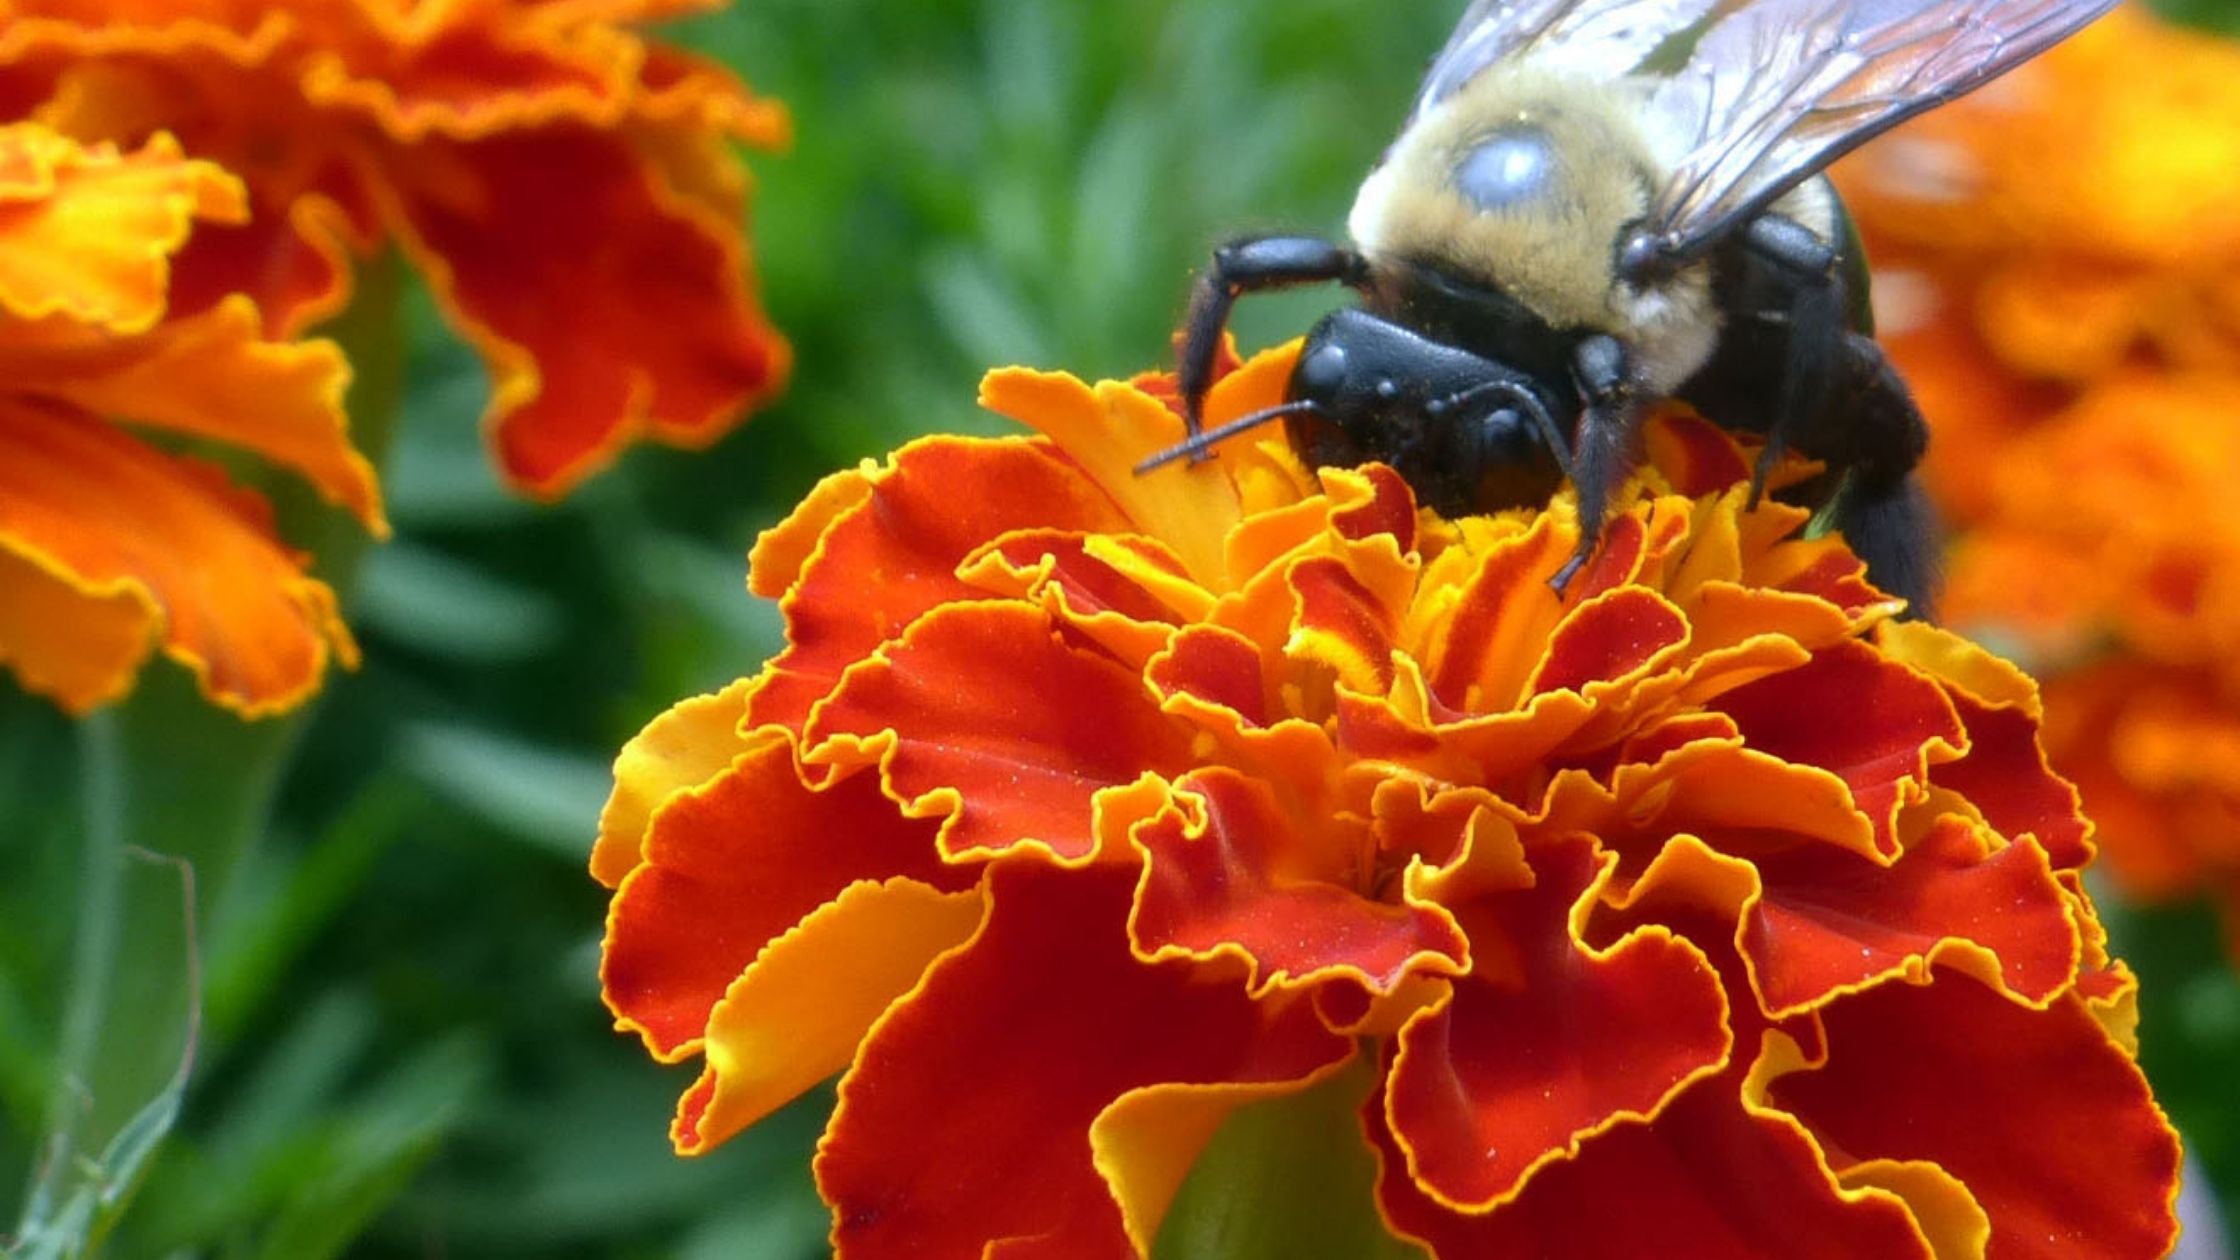 Bumblebee on a marigold. (companion plants for carrots)